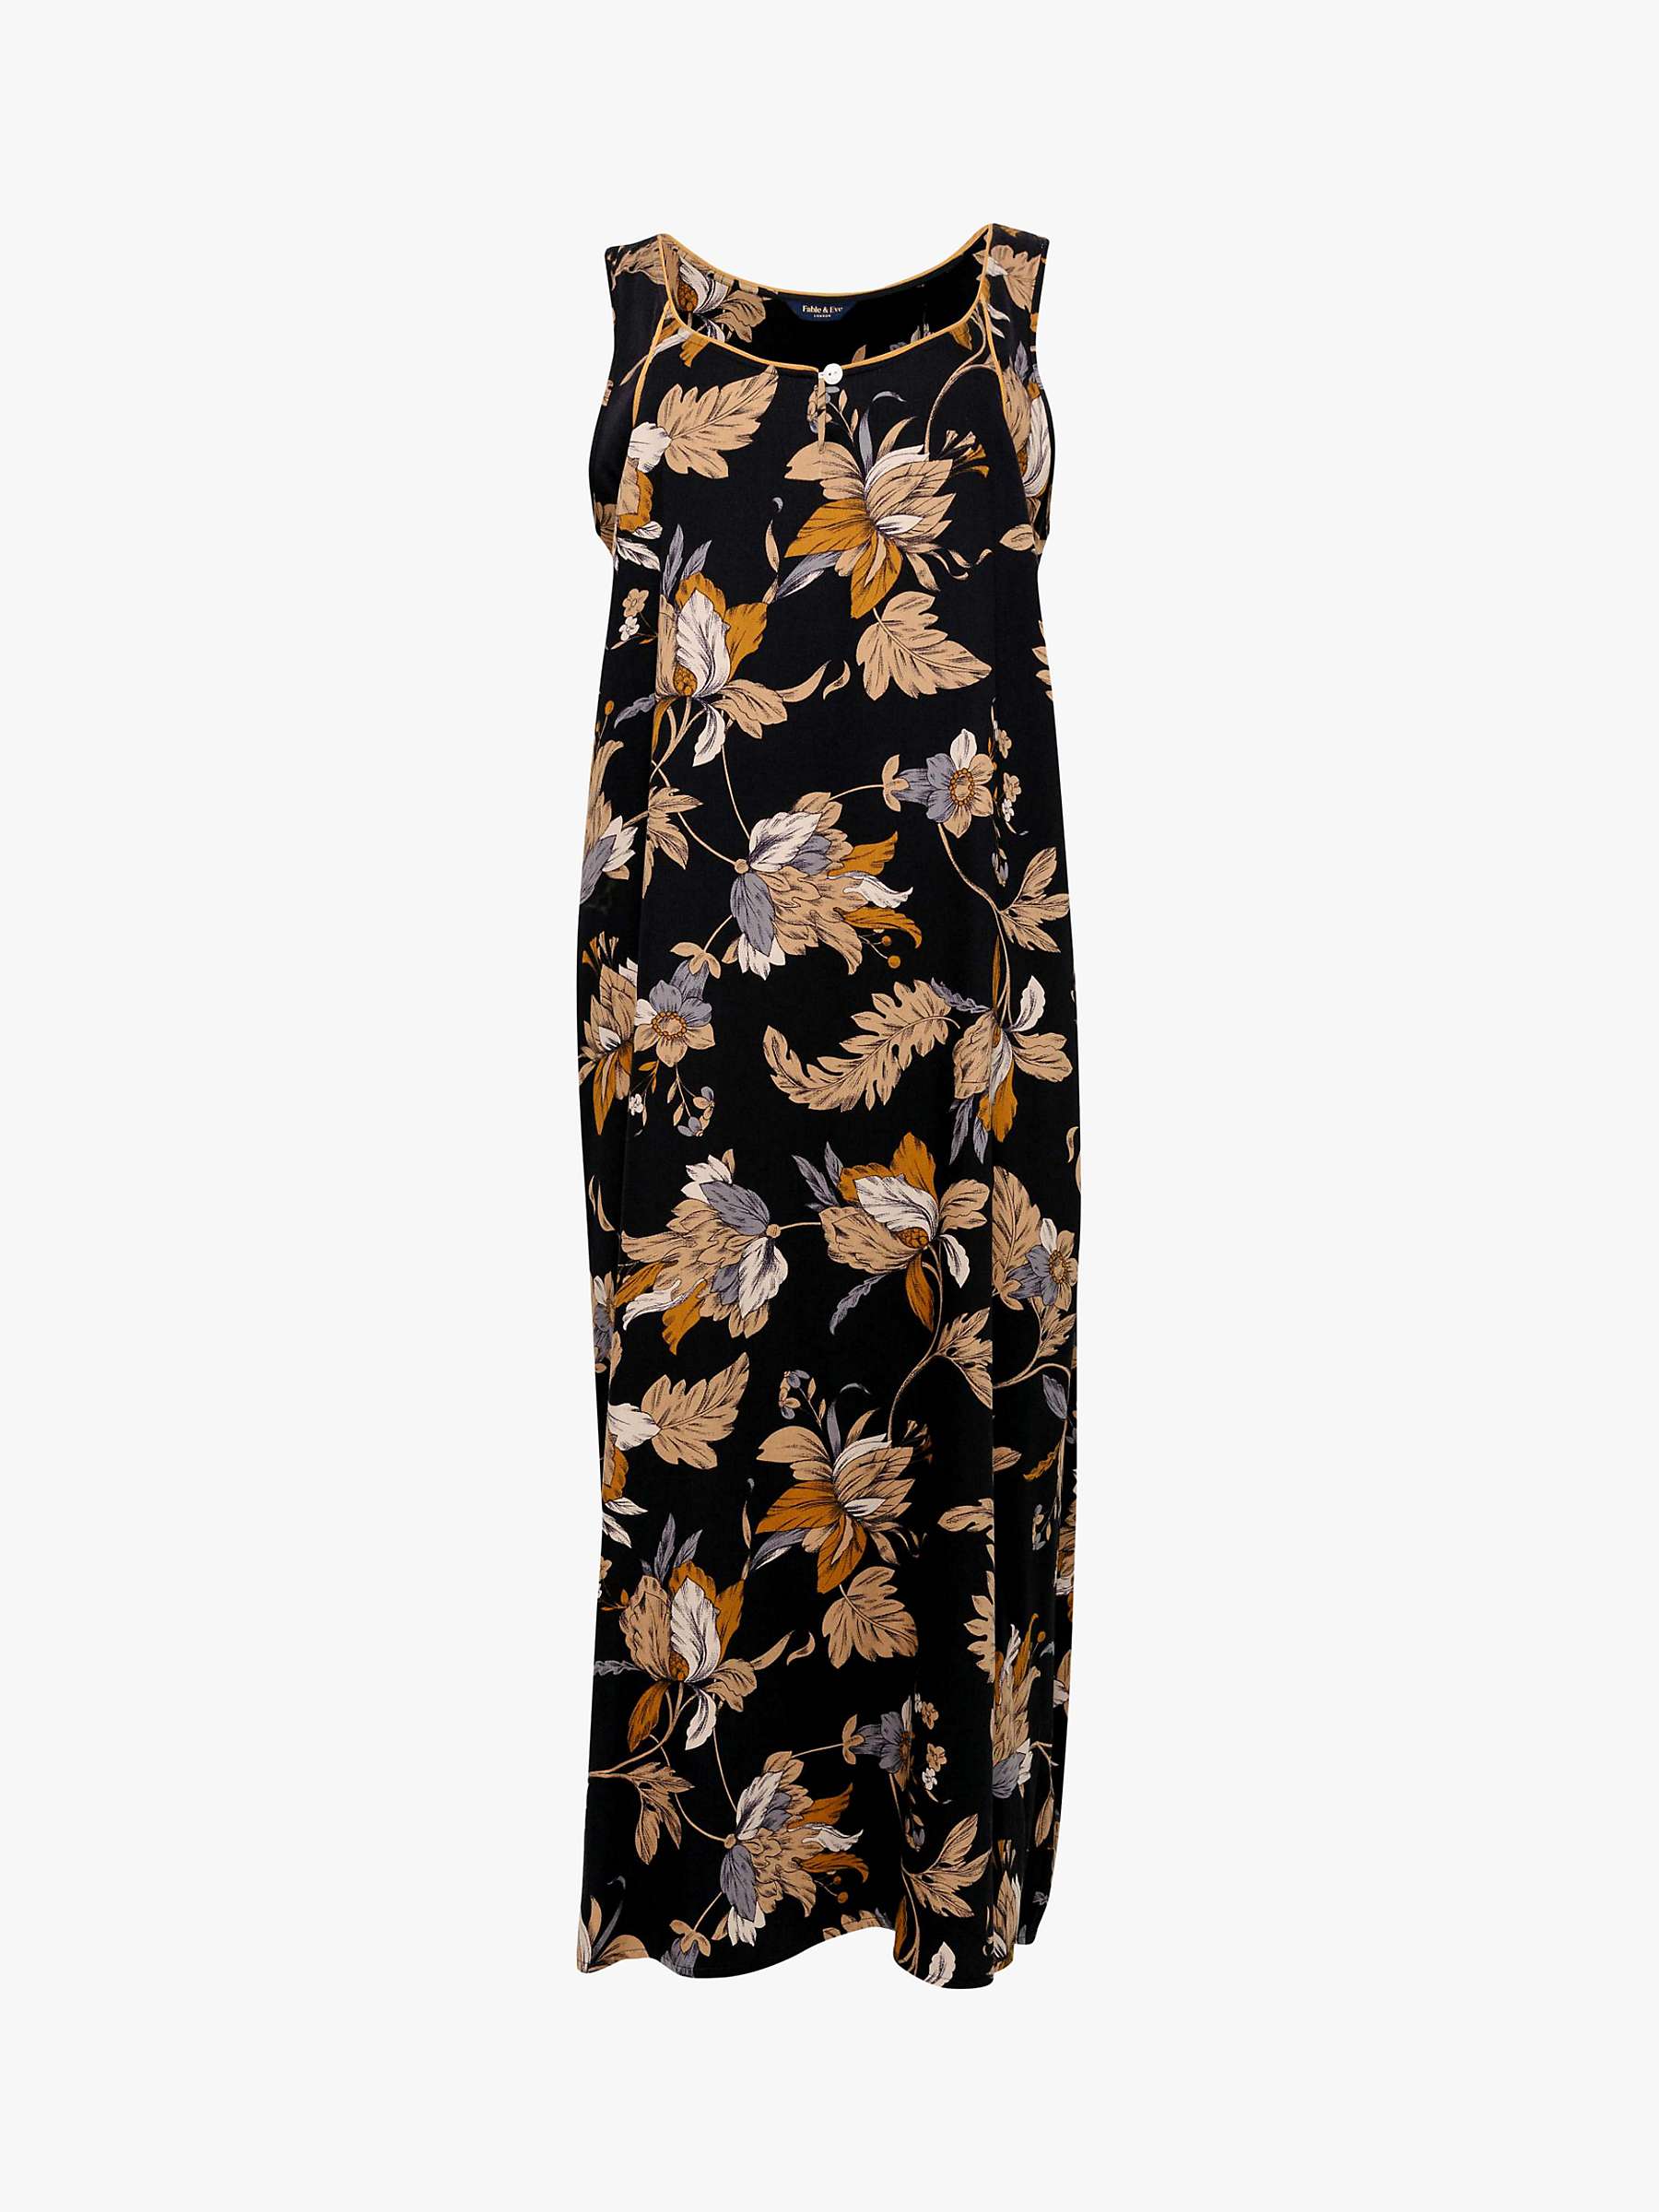 Buy Fable & Eve Brixton Floral Print Long Nightdress, Black/Multi Online at johnlewis.com